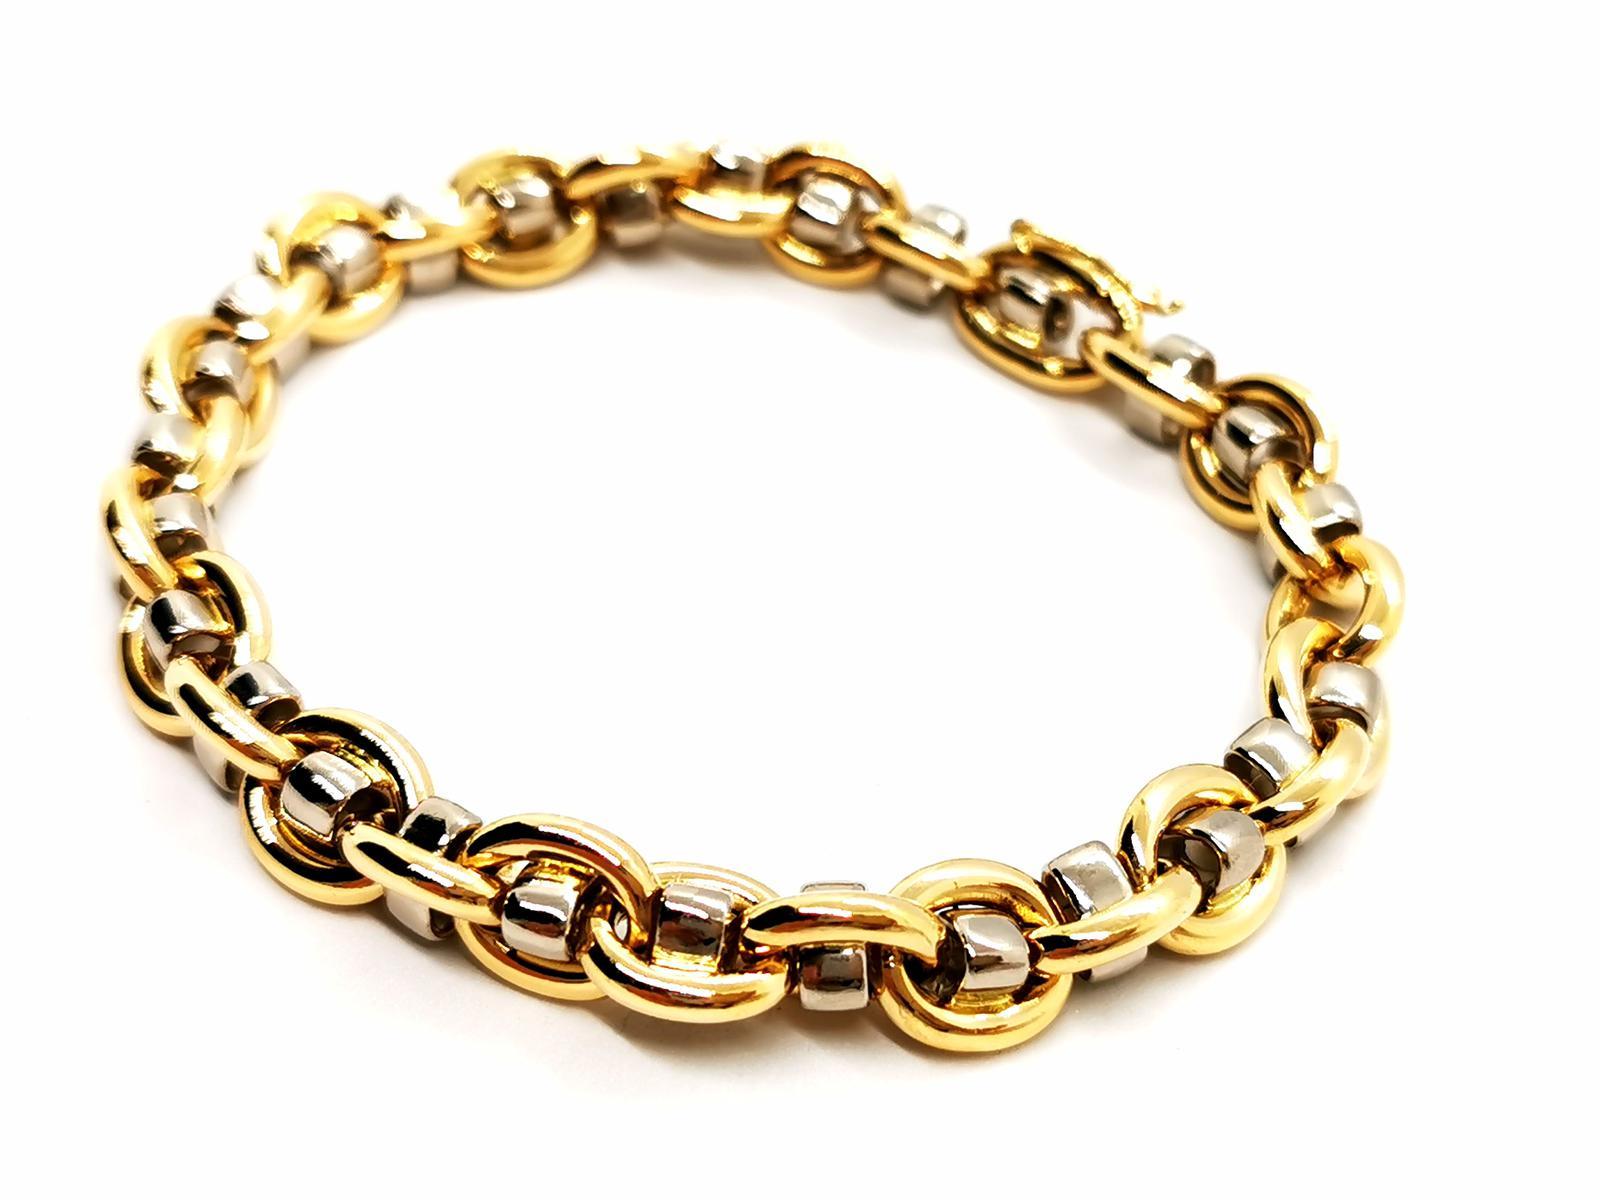 Bracelet in yellow and white gold 750 thousandths (18 carats). soft mesh. clasp with eight safety. length: 22 cm. width: 0.96 cm. total weight: 41.42 g. eagle head hallmark. excellent condition
